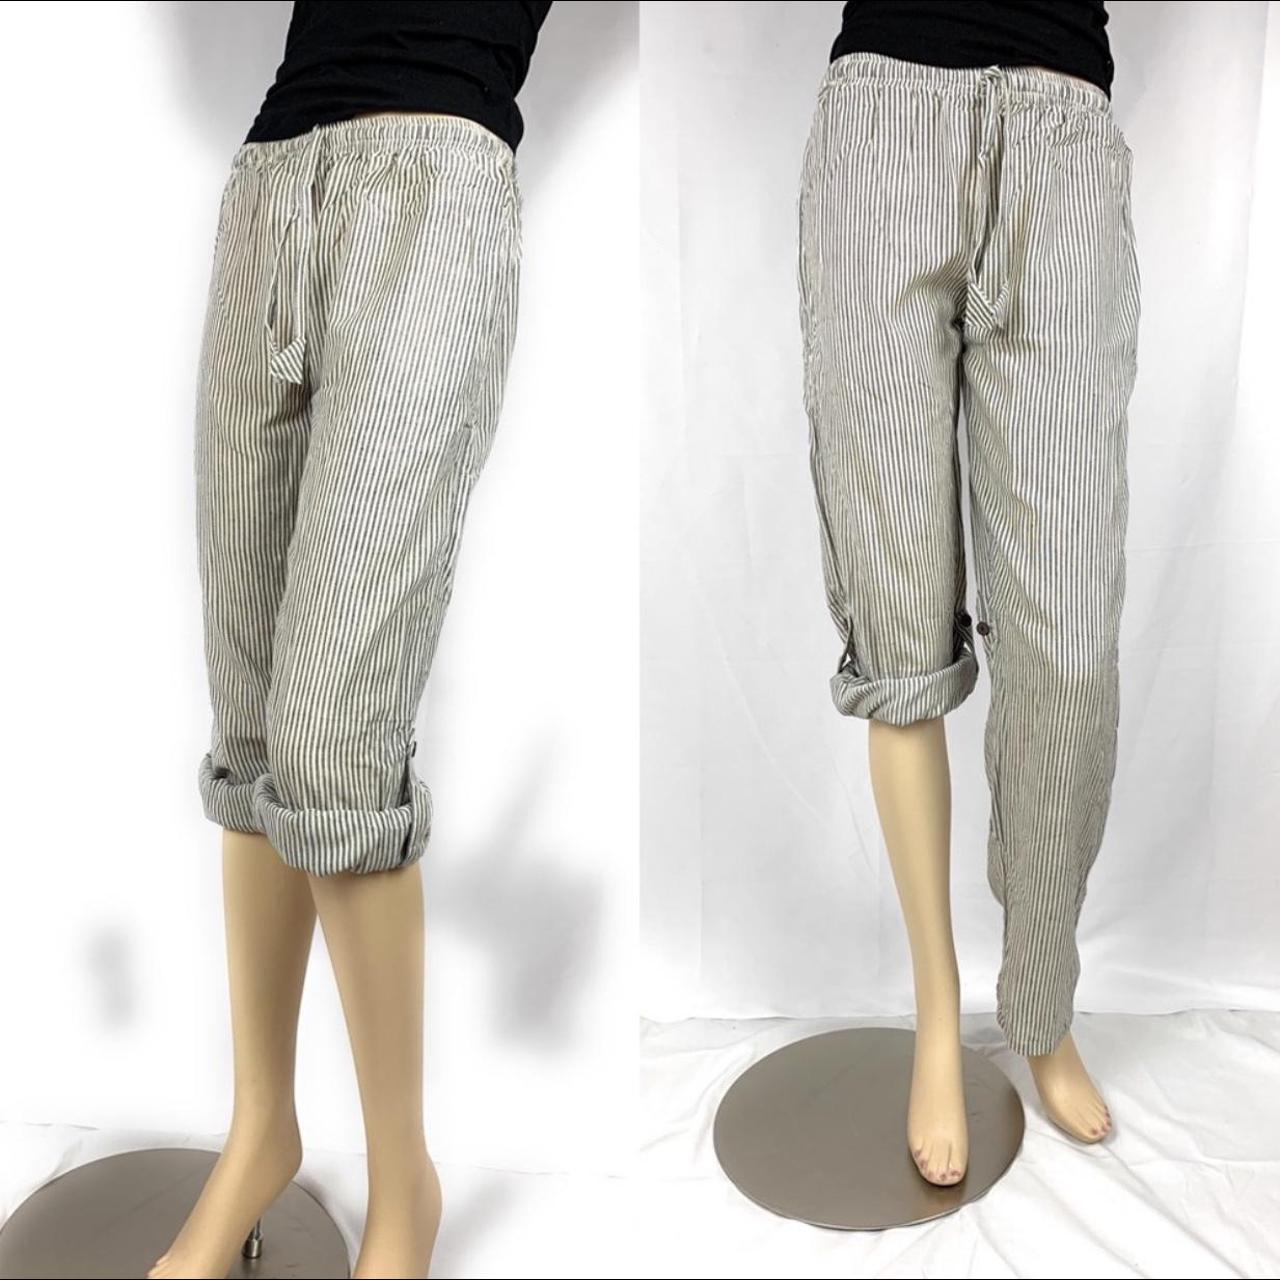 Spring/Summer New Bamboo Cotton Women's Straddle Dress Pants